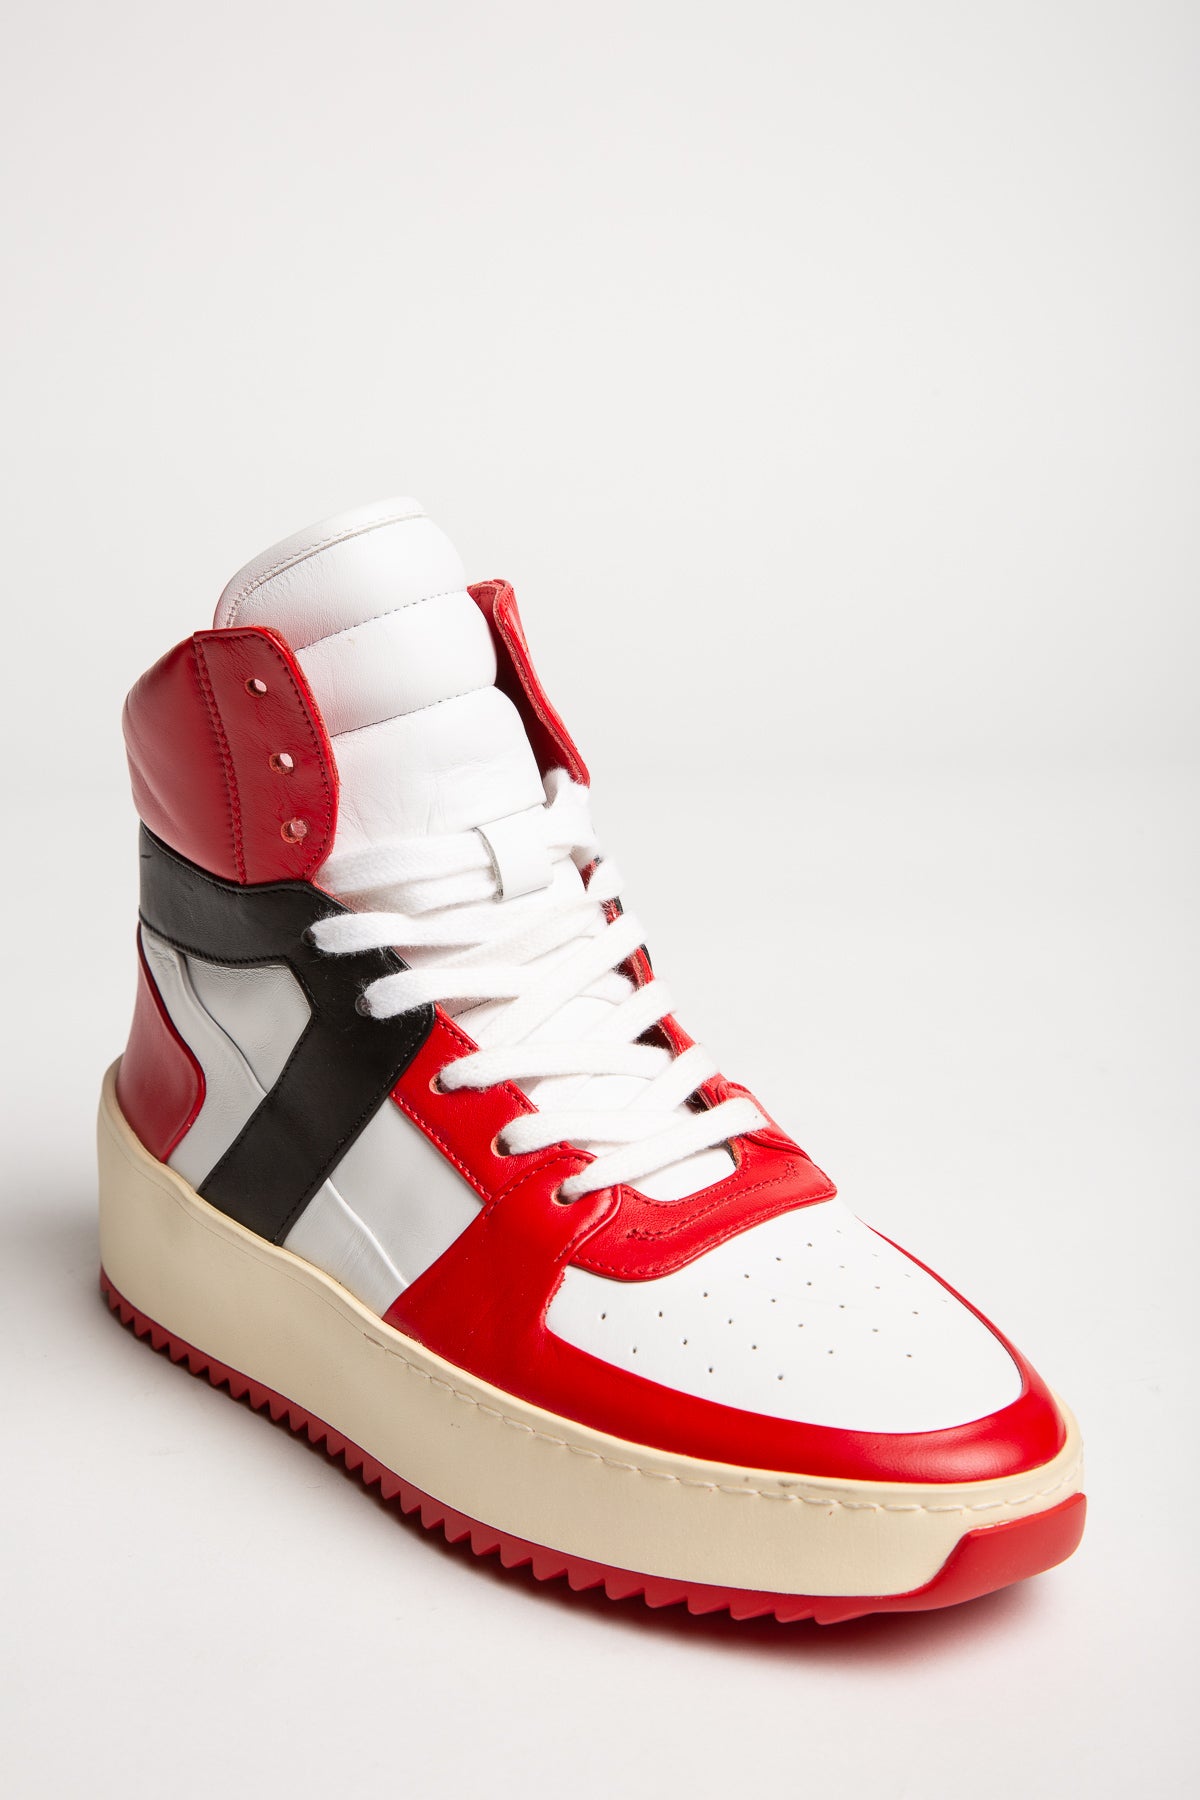 FEAR OF GOD | RETRO BASKETBALL SNEAKERS